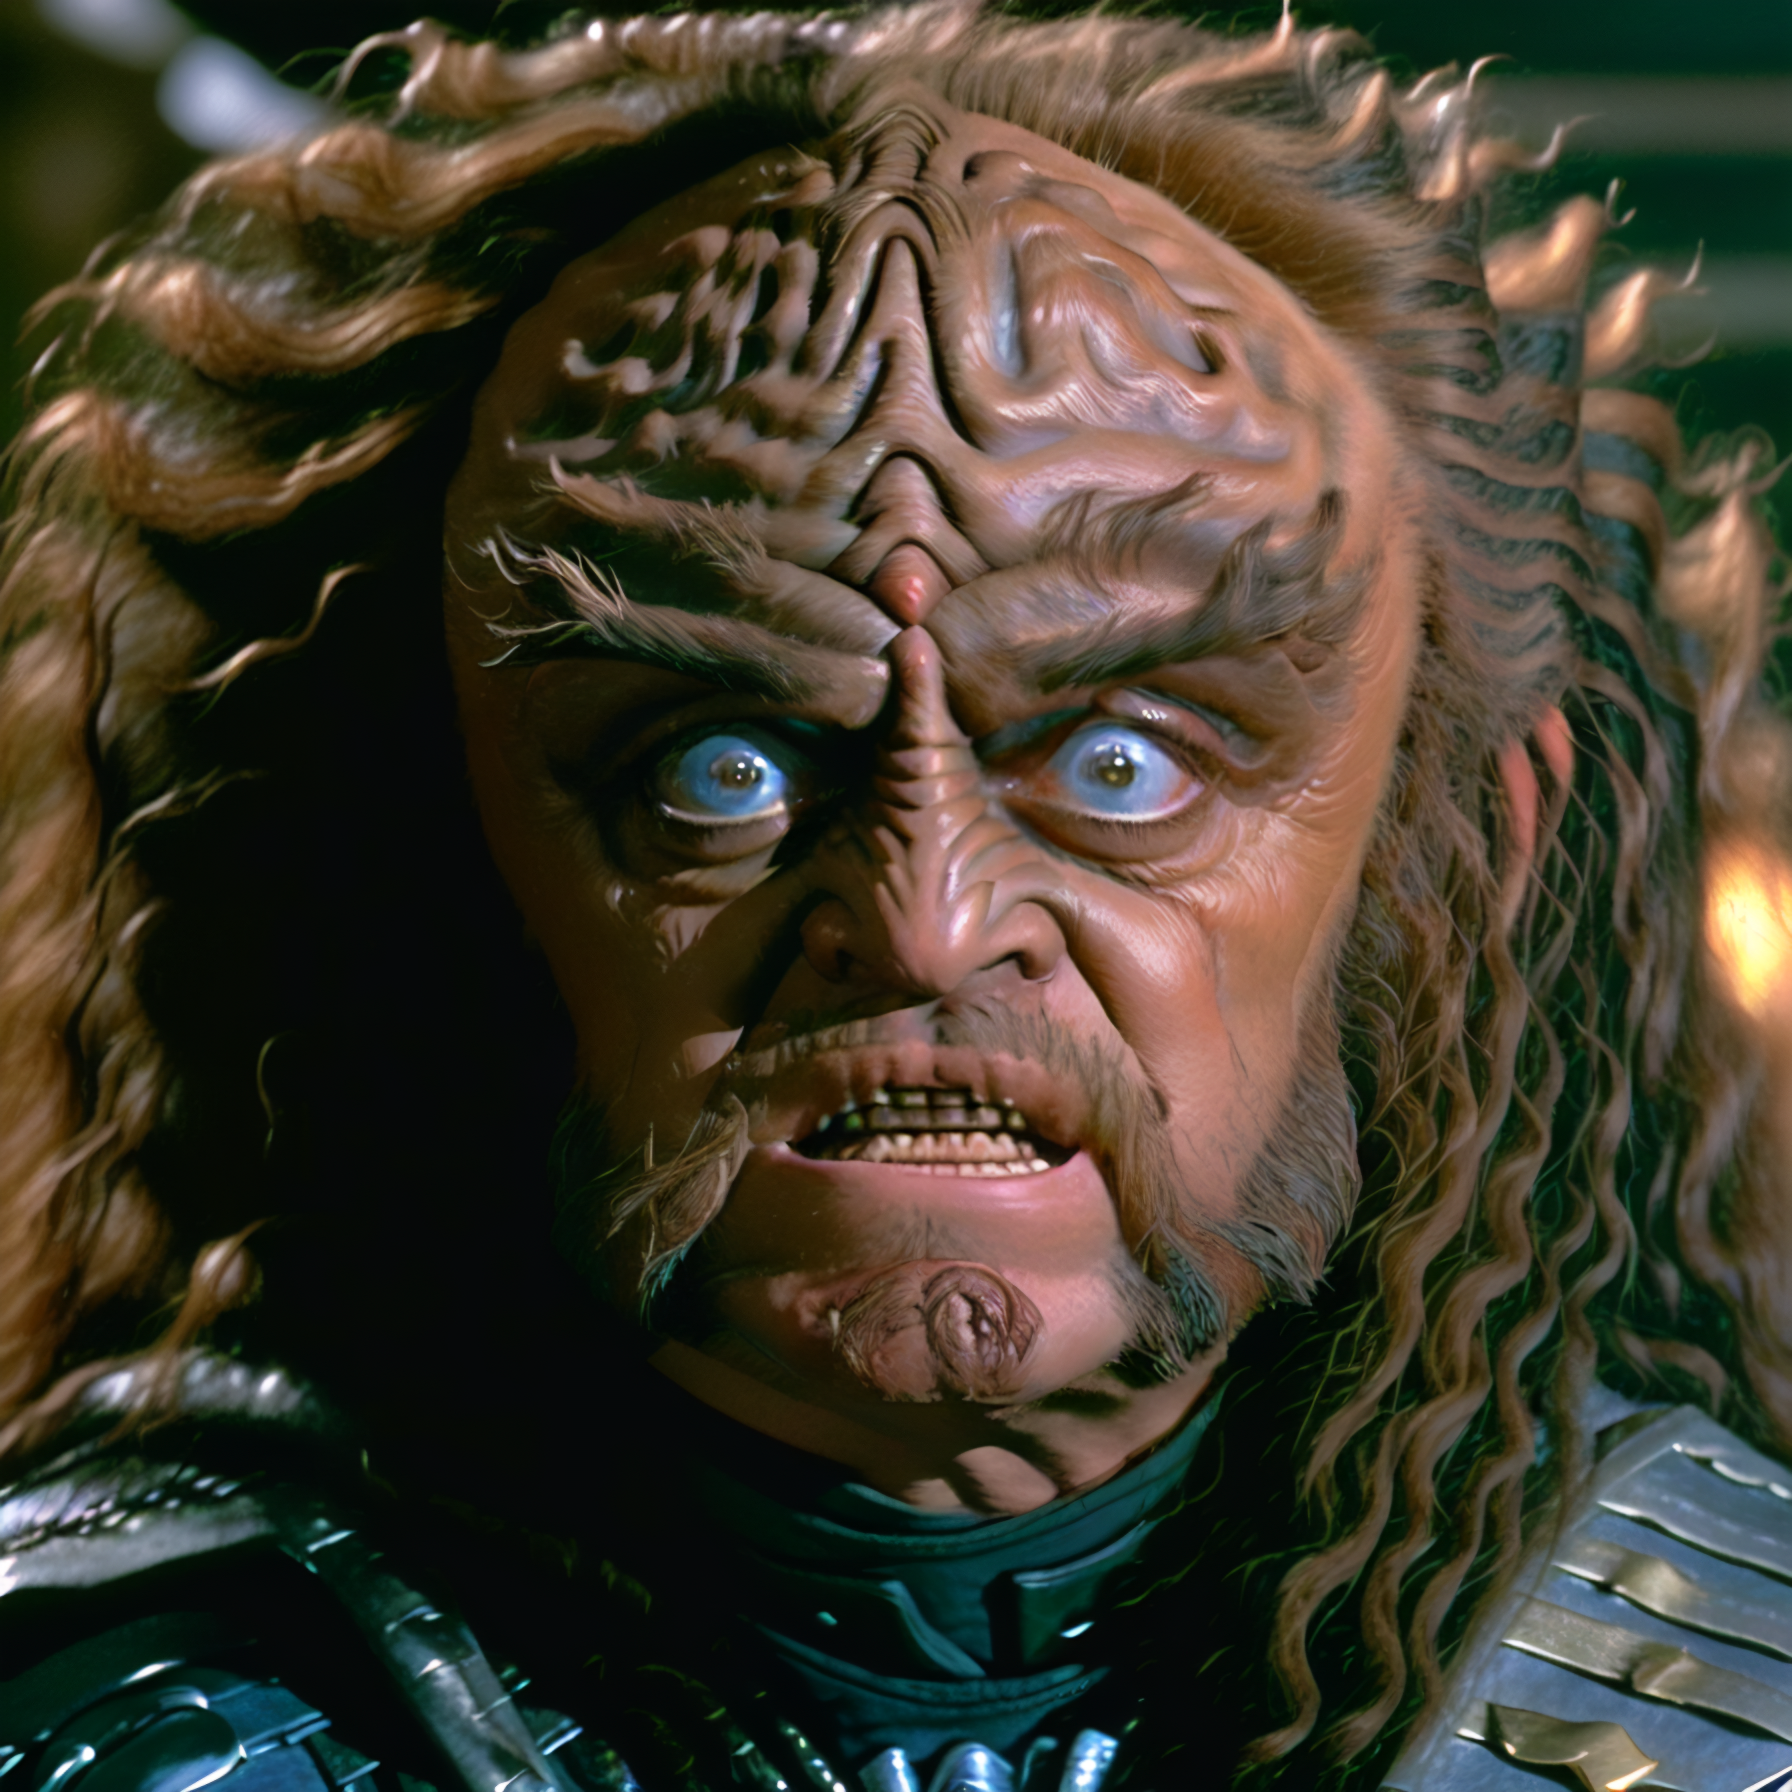 tng-gowron raising his fist in the air withLora(n47-v1-tng-gowron,0.75) angry++ wide open eyes